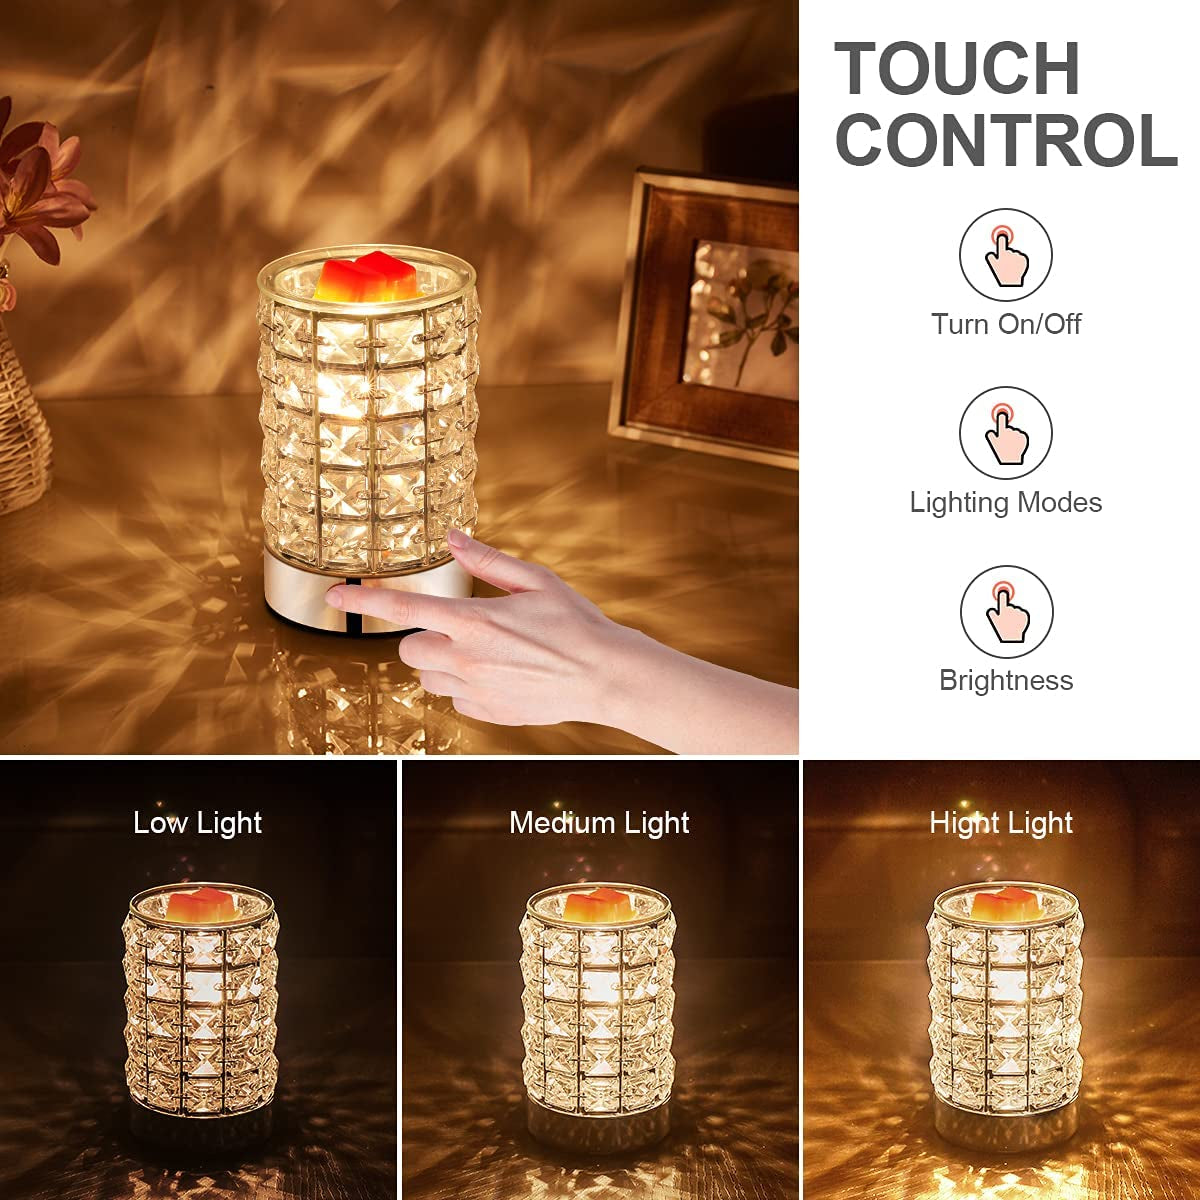 Crystal Touch Electric Wax Melt Warmer with Dimmable Fragrance Candle Melter Warmer for Warming Scented Candle Oil Burner- Spa,Aromatherapy (Transparent Crystal)